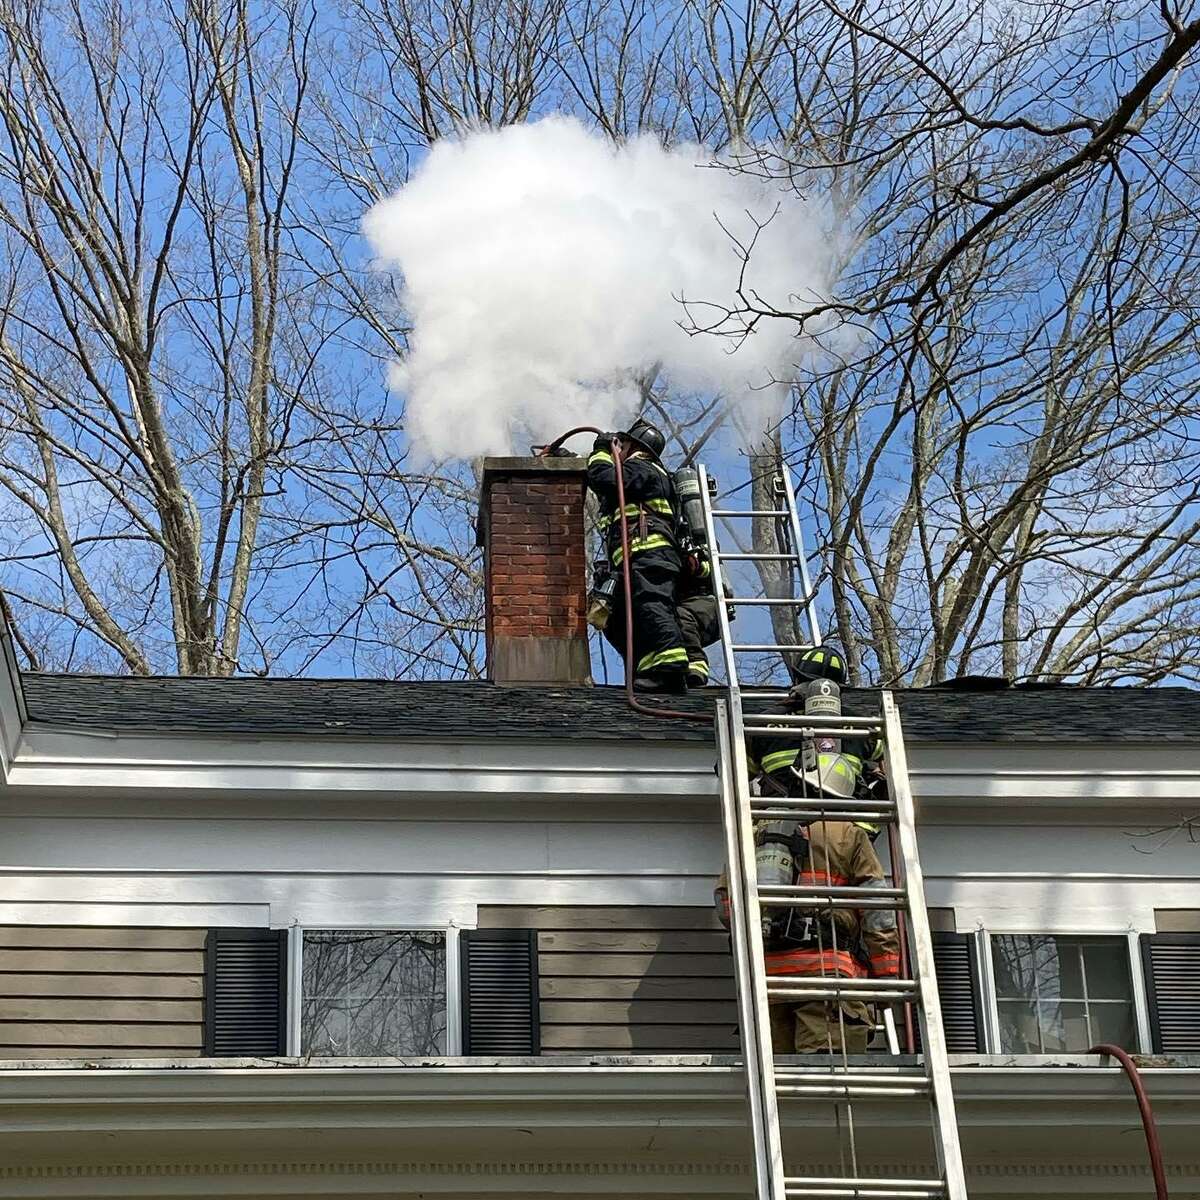 Fire departments responded to a chimney fire at a home on Pine Hill Road in New Hartford on April 4.